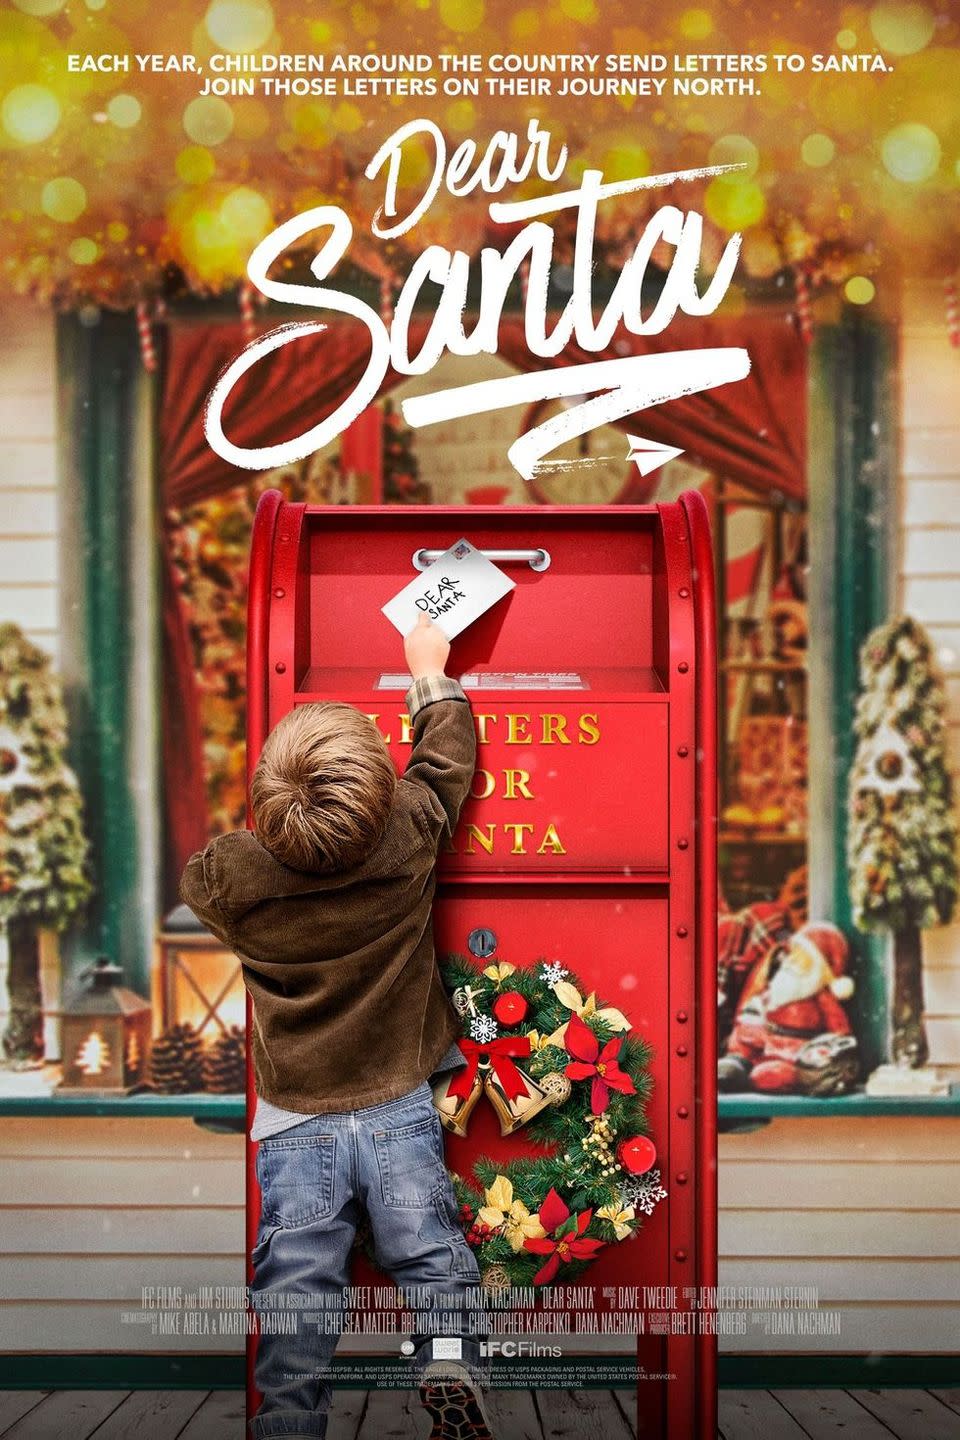 <p>This documentary highlights the US Postal Service's "Dear Santa" program, which allows people to adopt letters that kids have written to Santa and make children's dreams come true. Who knows, you might even be inspired to play Santa for someone in your community. (Note: This is probably not one to watch with your little ones who believe in Santa, but would be a great choice for older kids and teens). </p><p><a class="link " href="https://go.redirectingat.com?id=74968X1596630&url=https%3A%2F%2Fwww.hulu.com%2Fmovie%2Fdear-santa-3d5e6f8e-ac91-4708-bba8-23635414a2b1&sref=https%3A%2F%2Fwww.womansday.com%2Flife%2Fentertainment%2Fg24227776%2Fbest-christmas-movies-for-kids%2F" rel="nofollow noopener" target="_blank" data-ylk="slk:Shop Now">Shop Now</a></p>